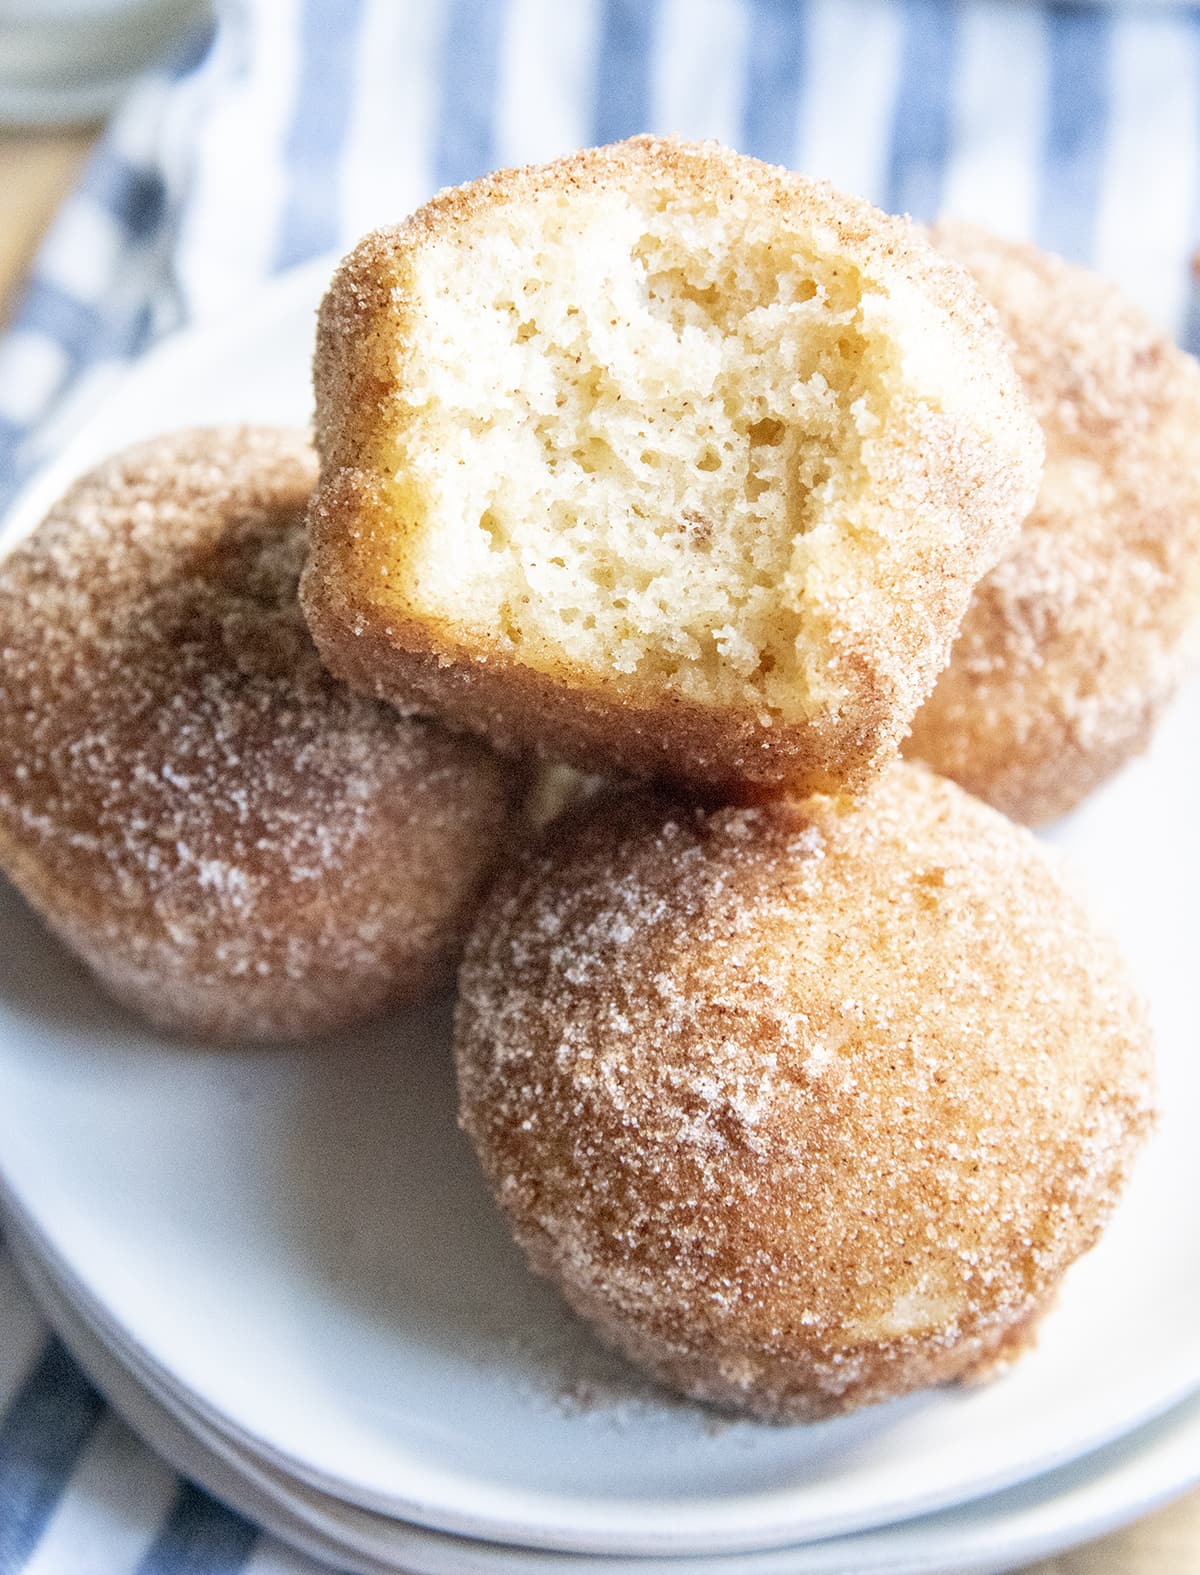 A pile of muffins coated in cinnamon sugar, the top muffin has a bite out of it showing the middle of the muffin.